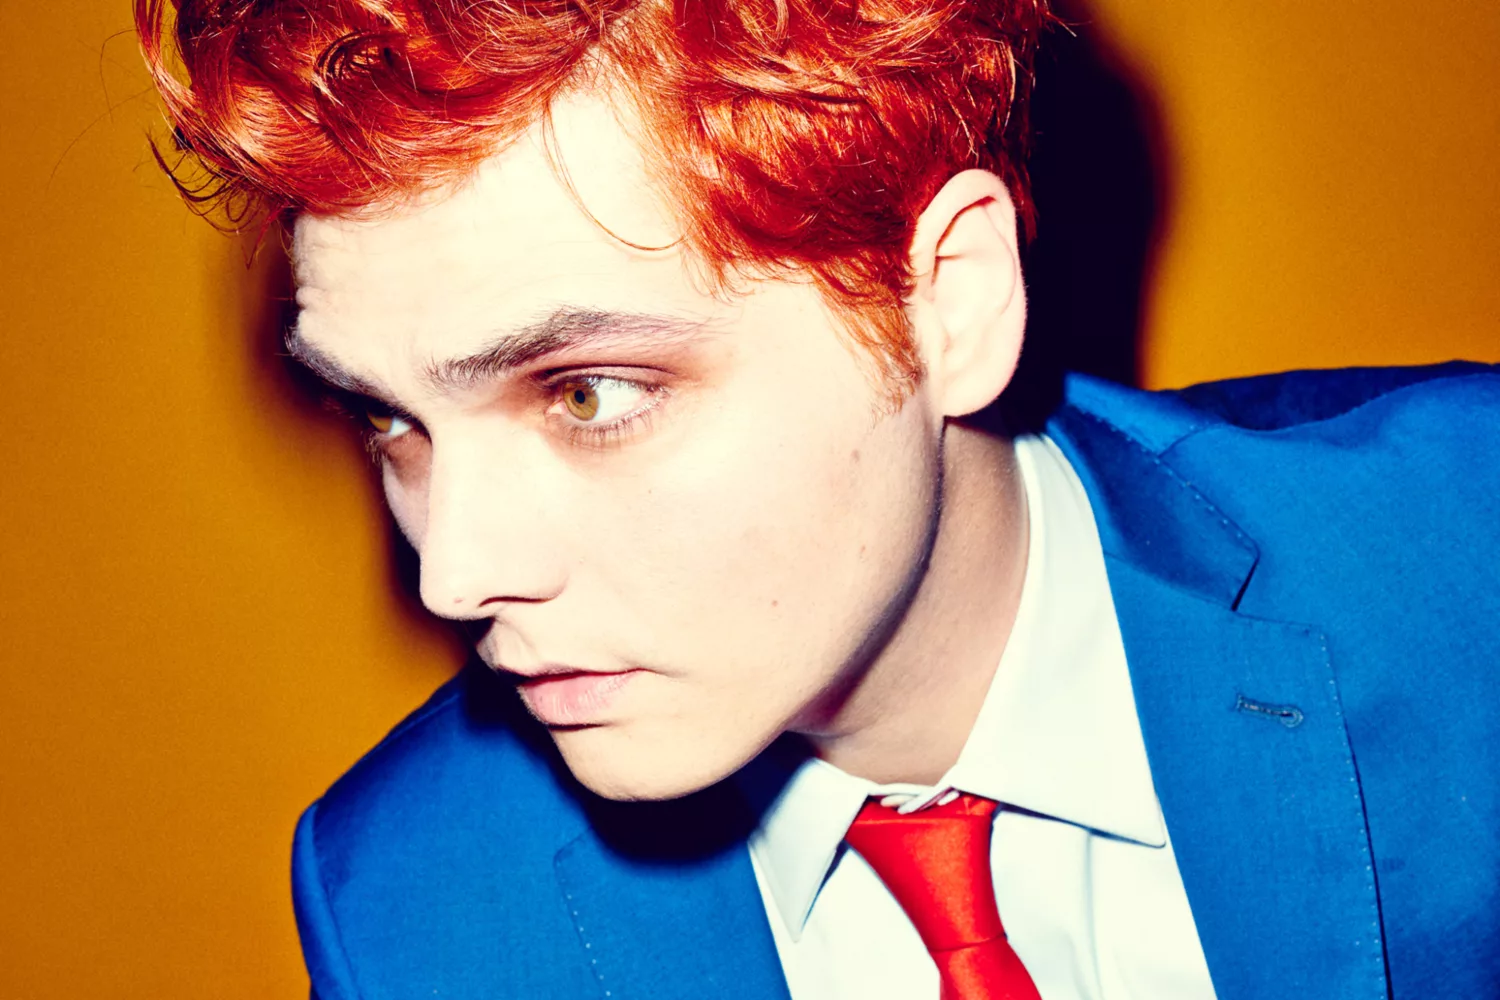 Tracks: Gerard Way, The Good, The Bad & The Queen, Westerman & more